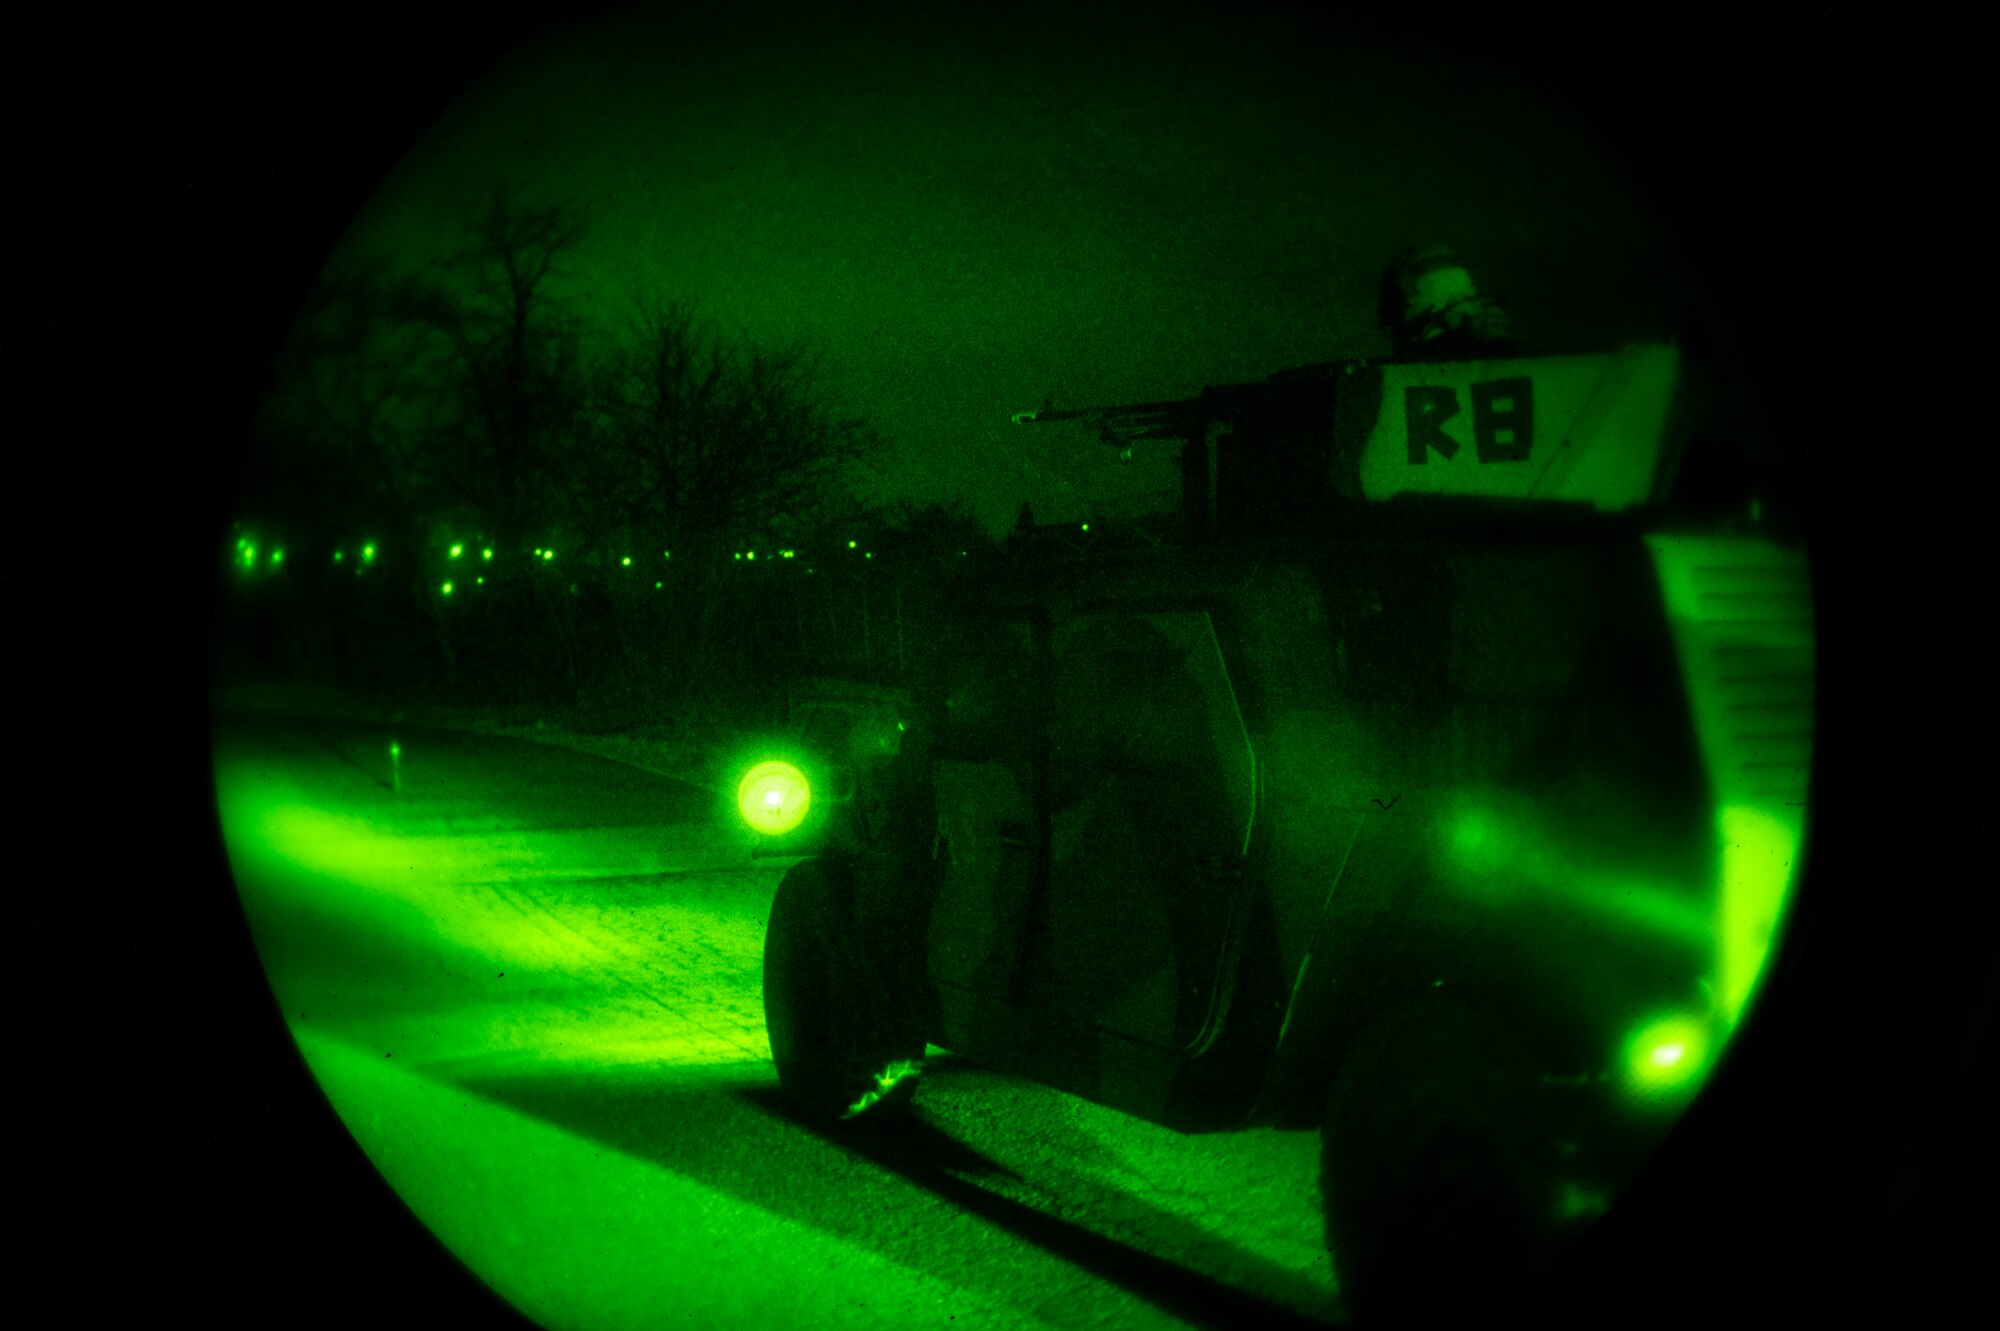 A U.S. Air Force Humvee, 51st Security Forces Squadron, stops before coming in contact with a simulated unexploded ordnance (UXO) during a night-time defend-the-base training scenario at Osan Air Base, Republic of Korea, Jan. 31 2023. UXOs can pose a serious threat to defense operations as they can be set off unexpectedly, potentially exploding and or releasing Chemical, Biological, Radioactive and Nuclear (CBRN) agents. When discovering a UXO members must keep a safe distance, report their findings to Base Defense Operations Center and establish a cordon around the UXO. (U.S. Air Force photo by Airman 1st Class Aaron Edwards)